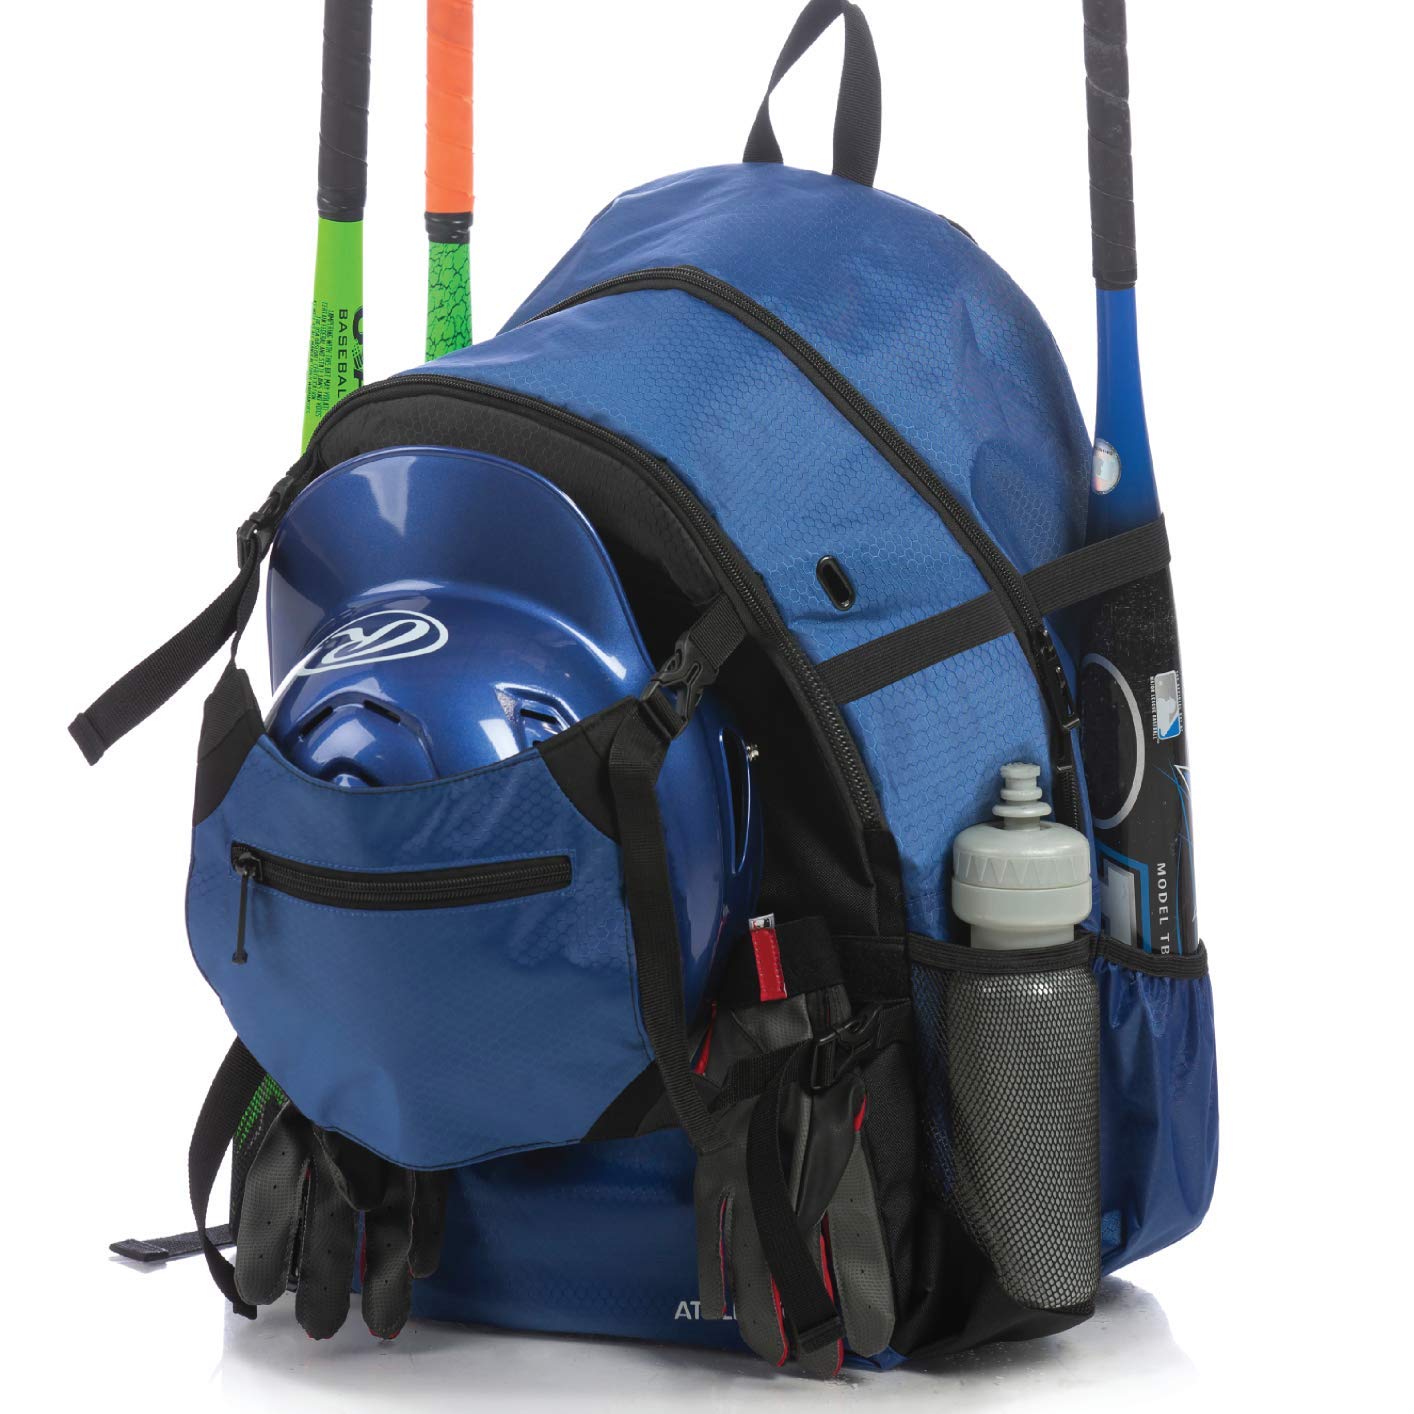 Athletico Advantage Baseball Bag - Baseball Backpack with External Helmet Holder for Baseball, T-Ball & Softball Equipment & Gear for Youth and Adults | Holds Bat, Helmet, Glove, Shoes (Blue)  - Very Good